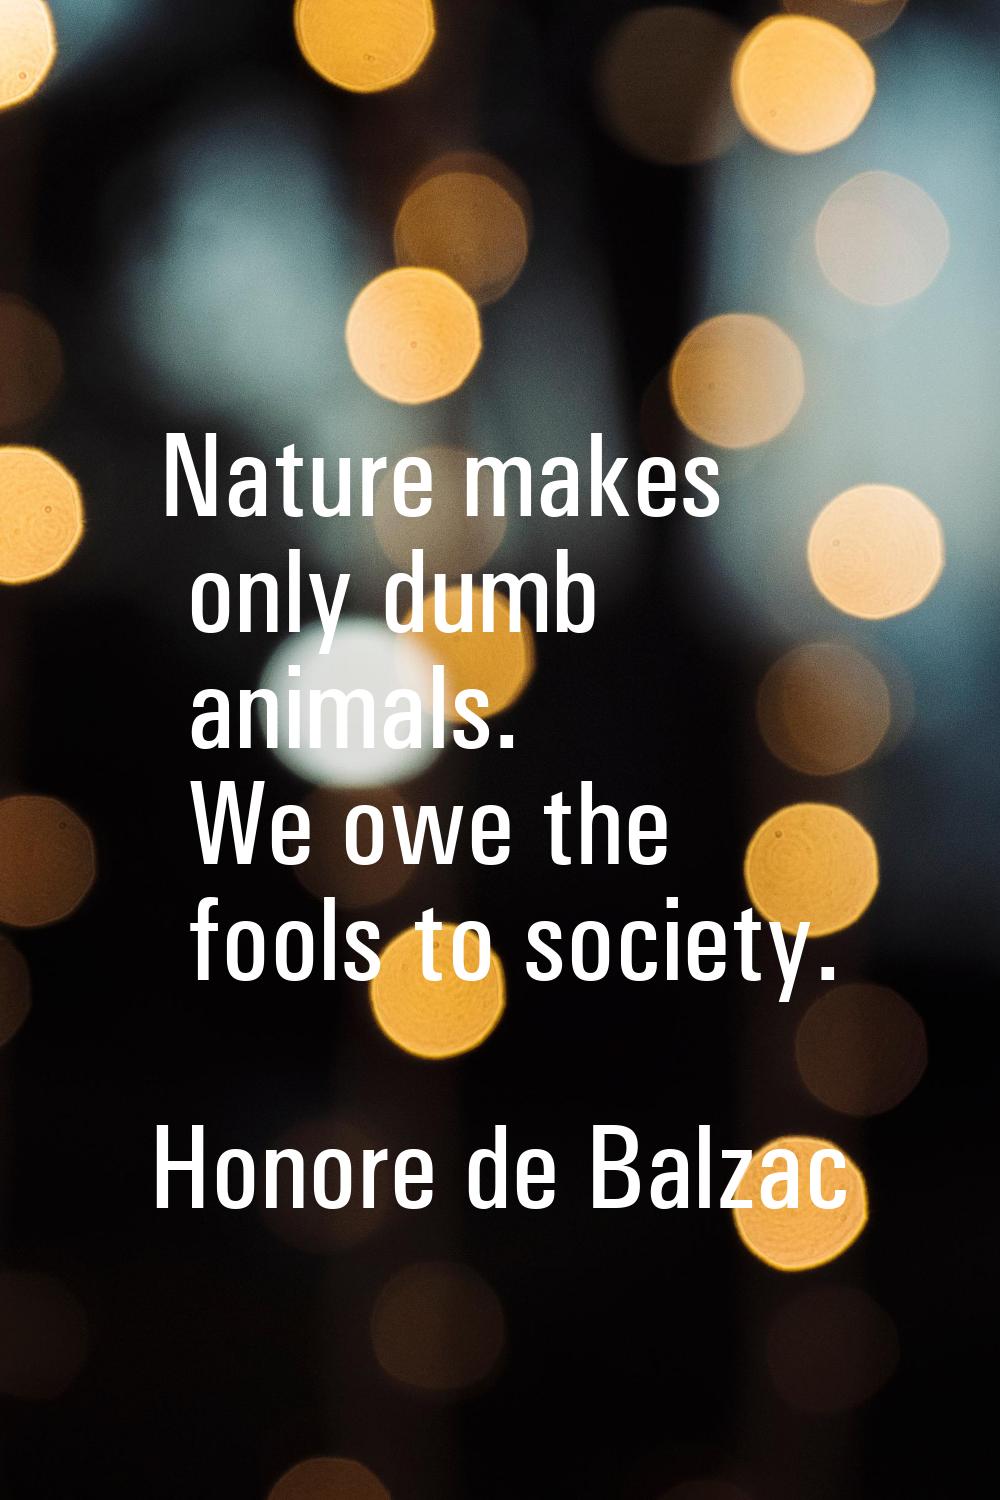 Nature makes only dumb animals. We owe the fools to society.